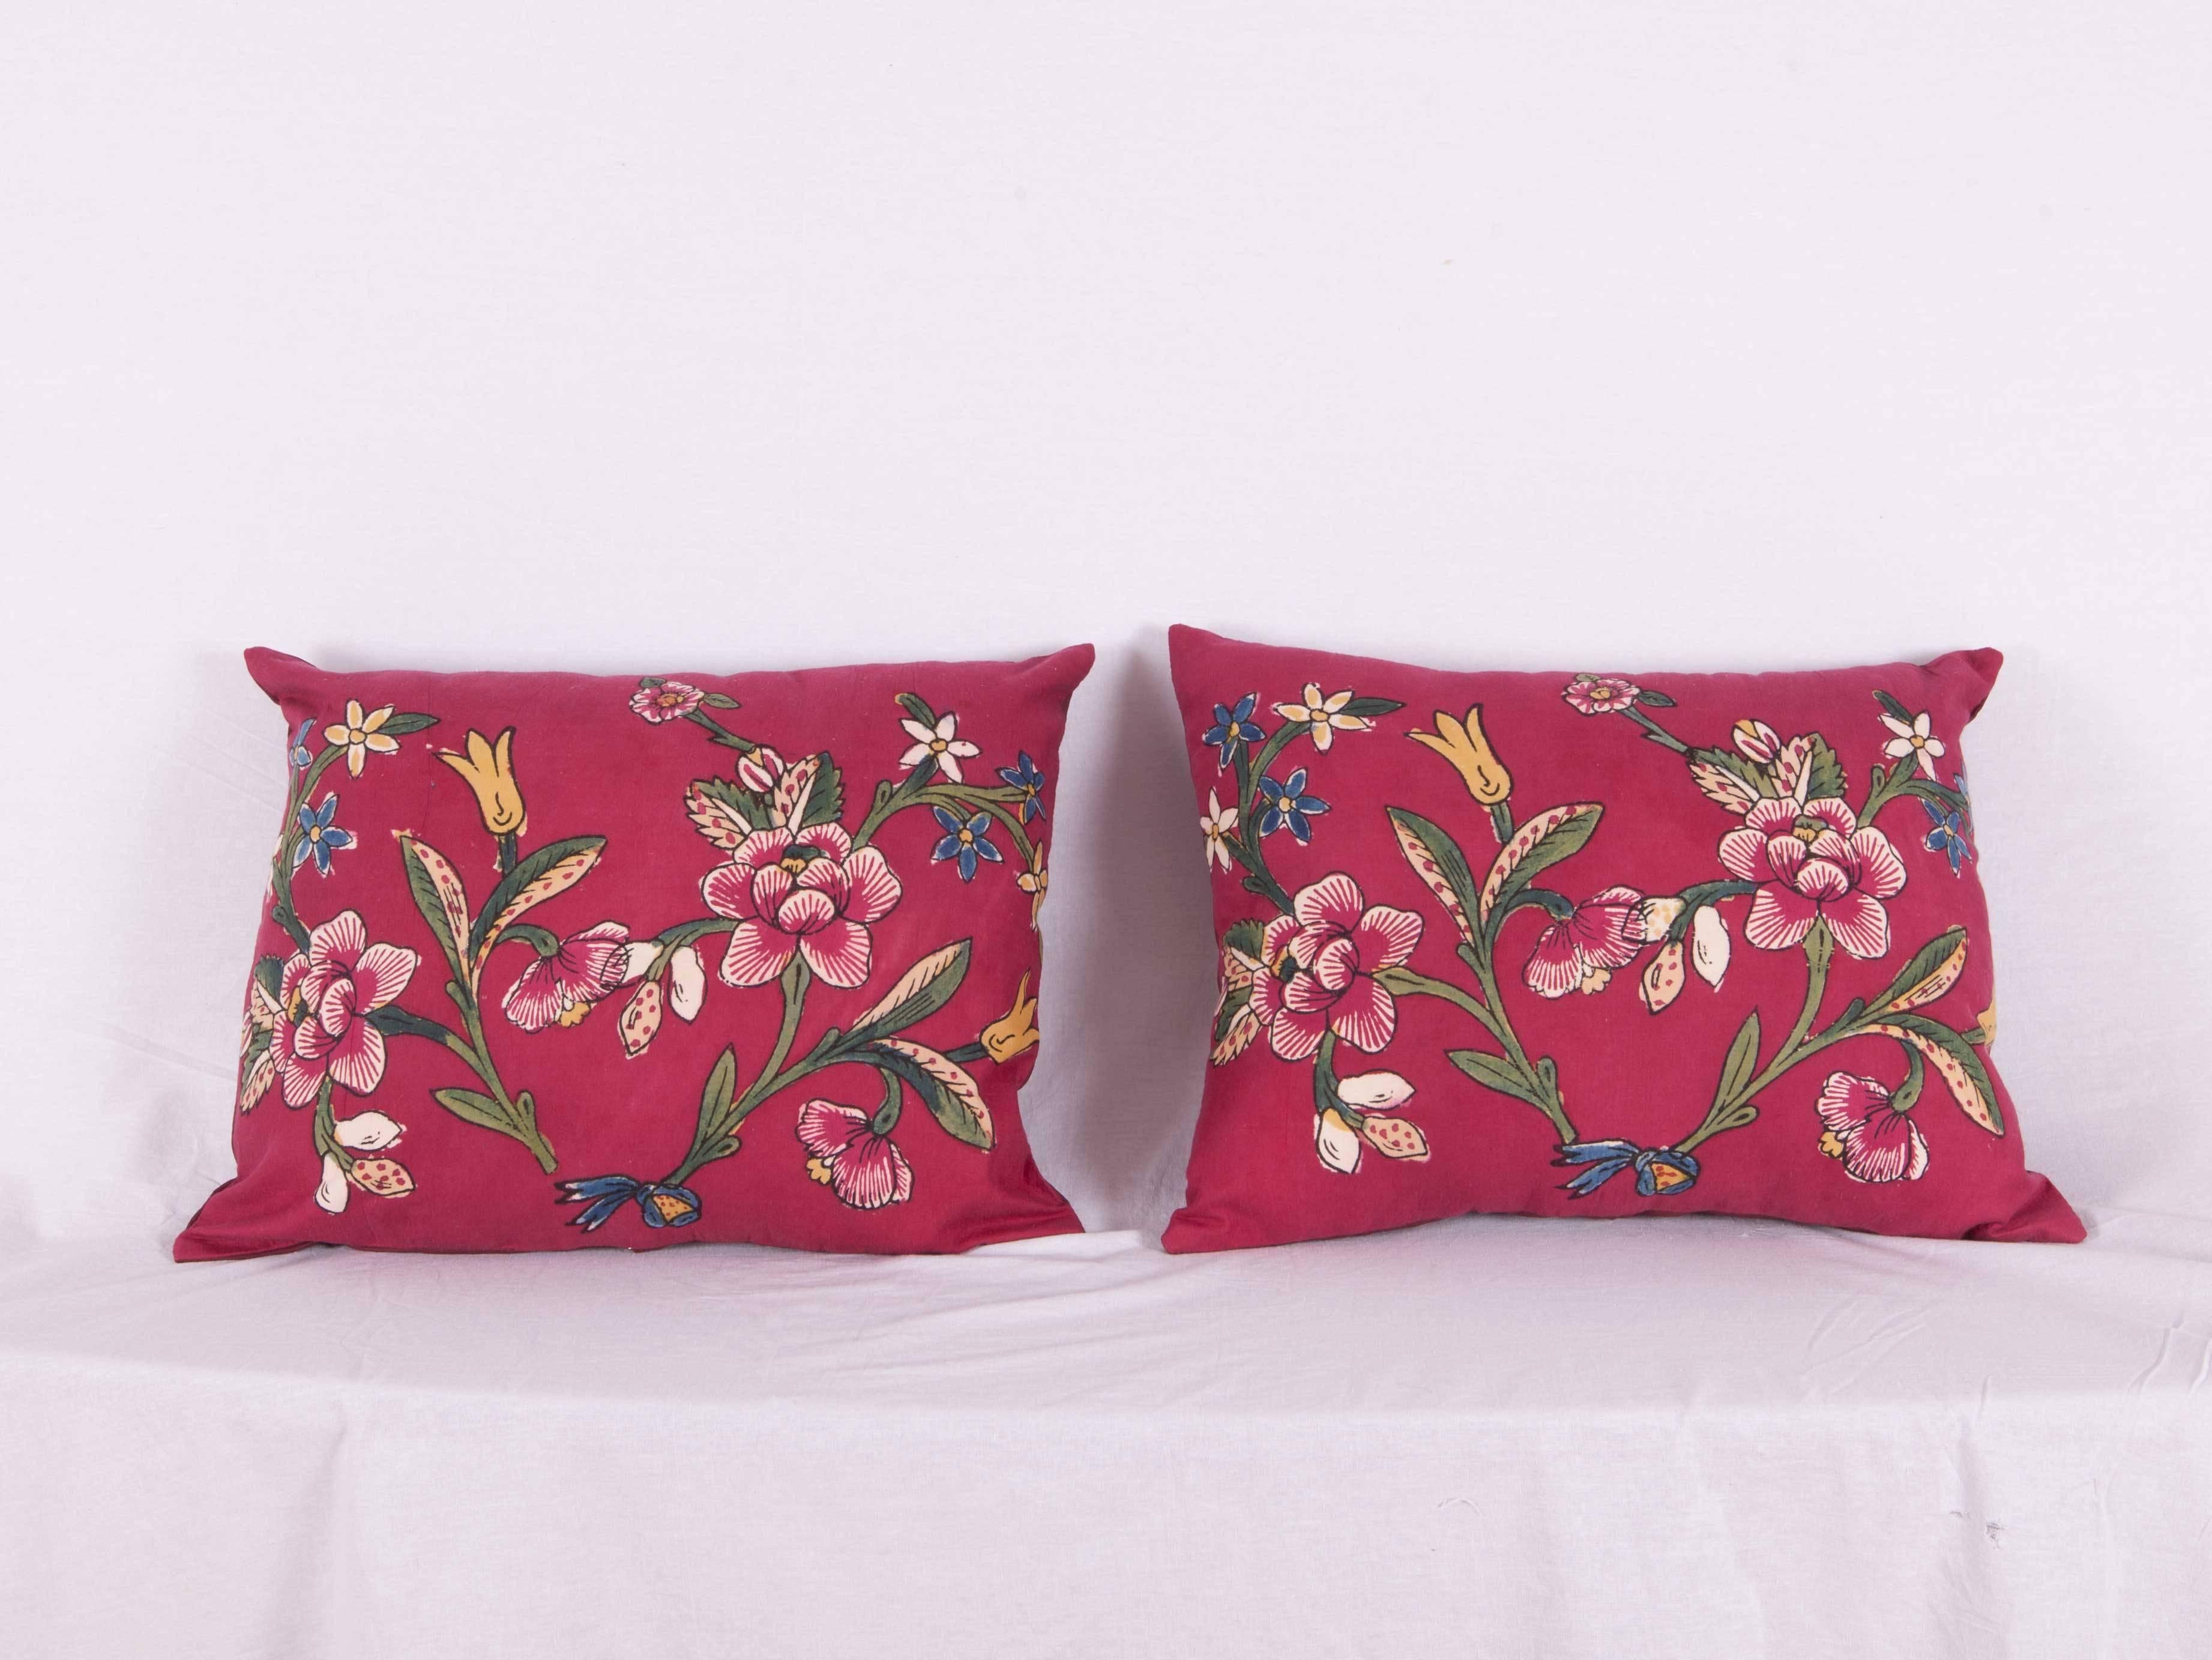 The pillow cases are made out of a mid-20th century, Turkish hand block printed cotton textile. They do not come with an insert but it come with a bag made to the size and out of cotton to accommodate the filling. The backing is made of linen.